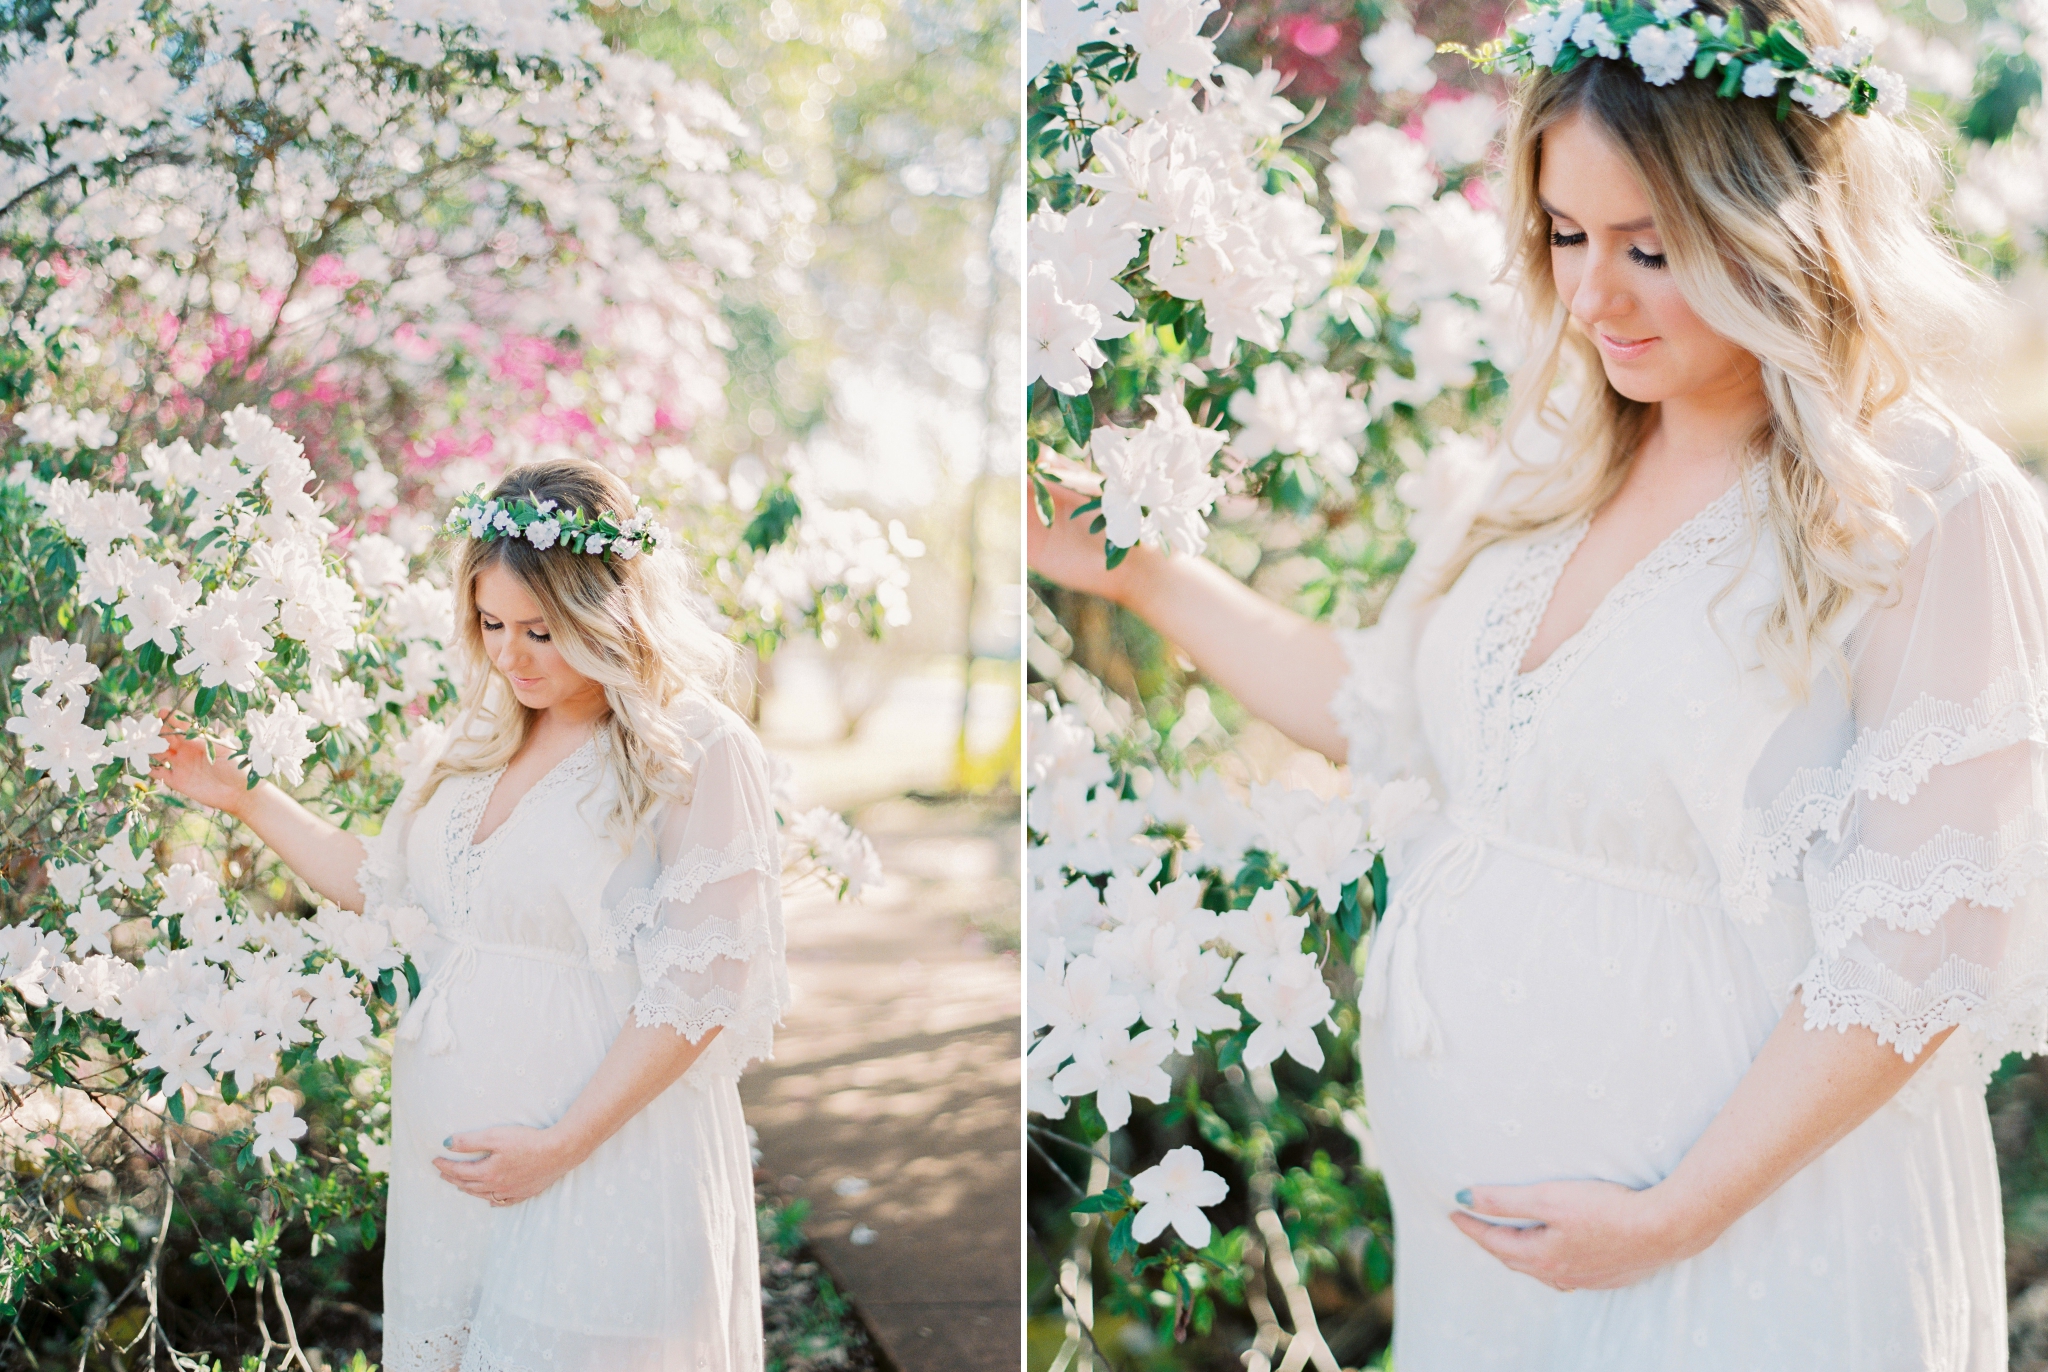 Beautiful Maternity photos by Casey Jane shot on film